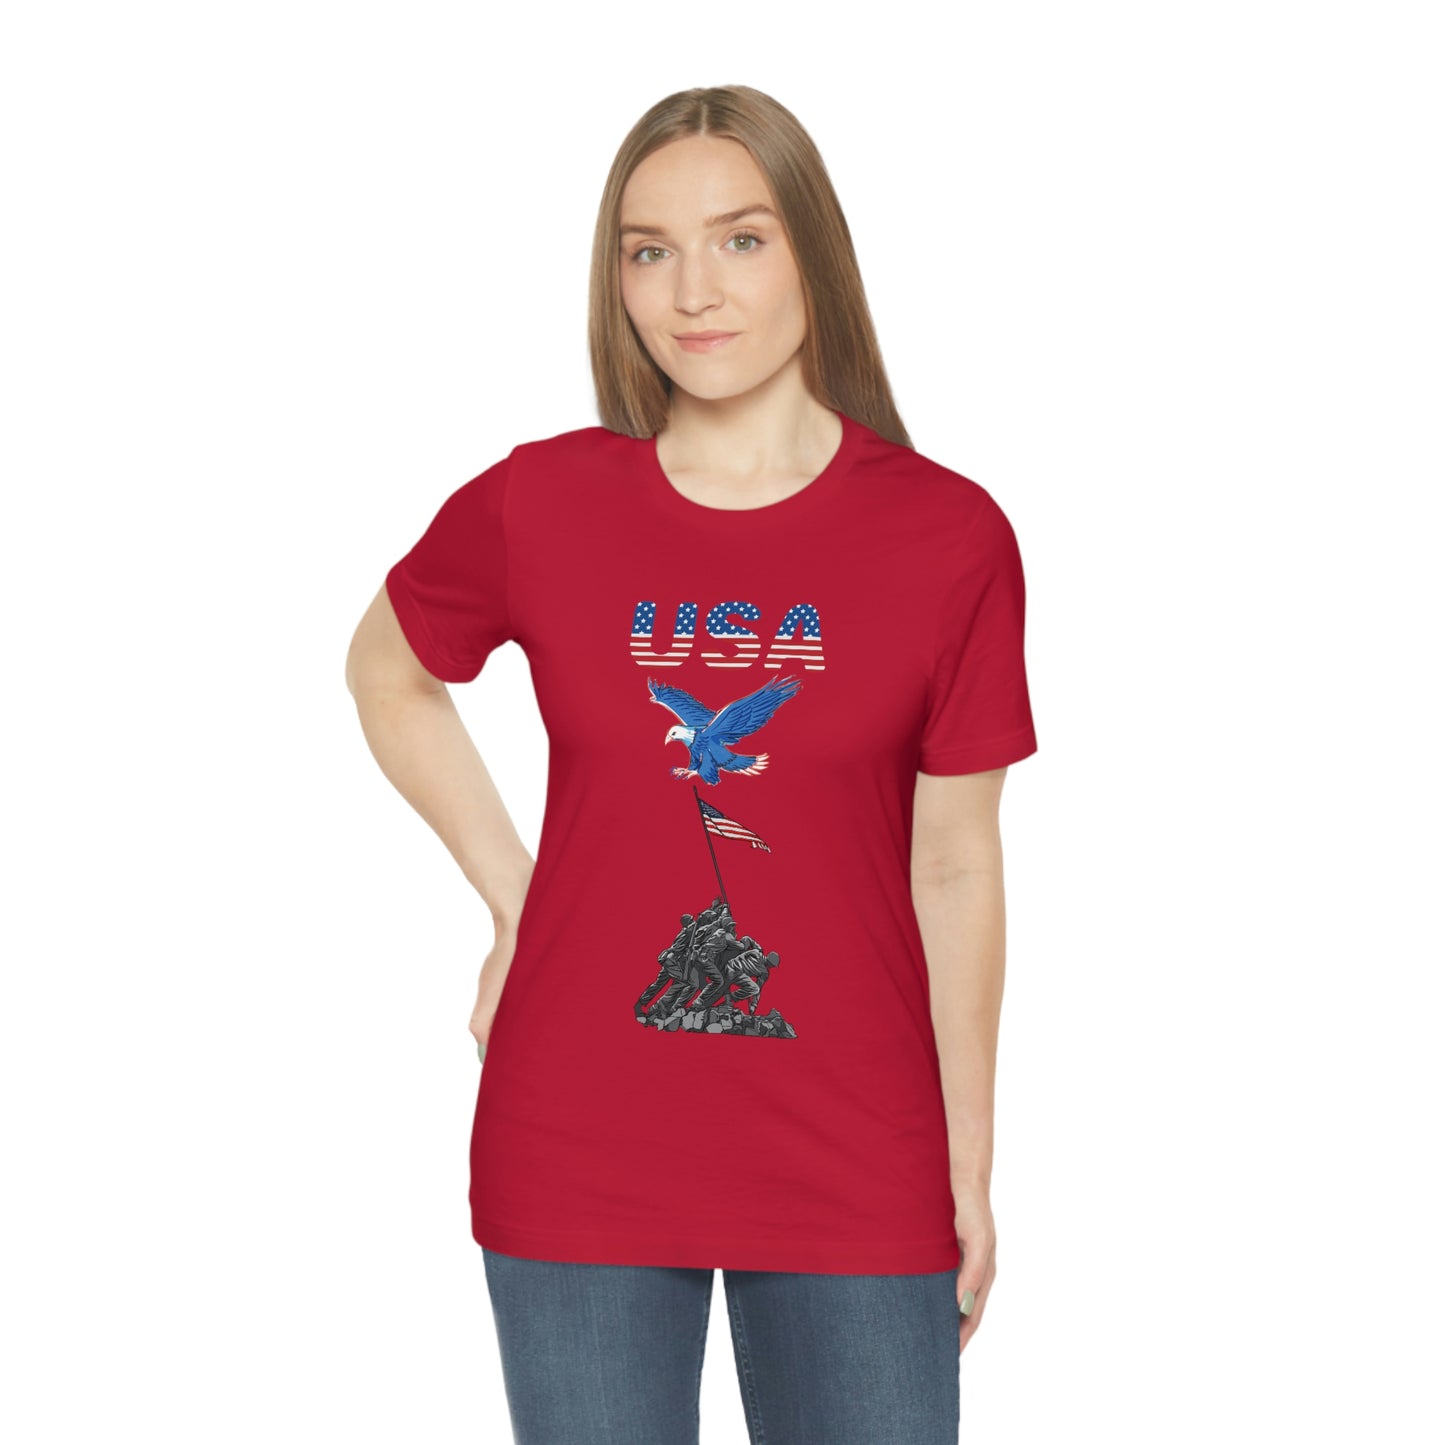 Happy 4th of July T-Shirt,  USA Flag, Patriot Shirts, Unisex Jersey Short Sleeve Tee